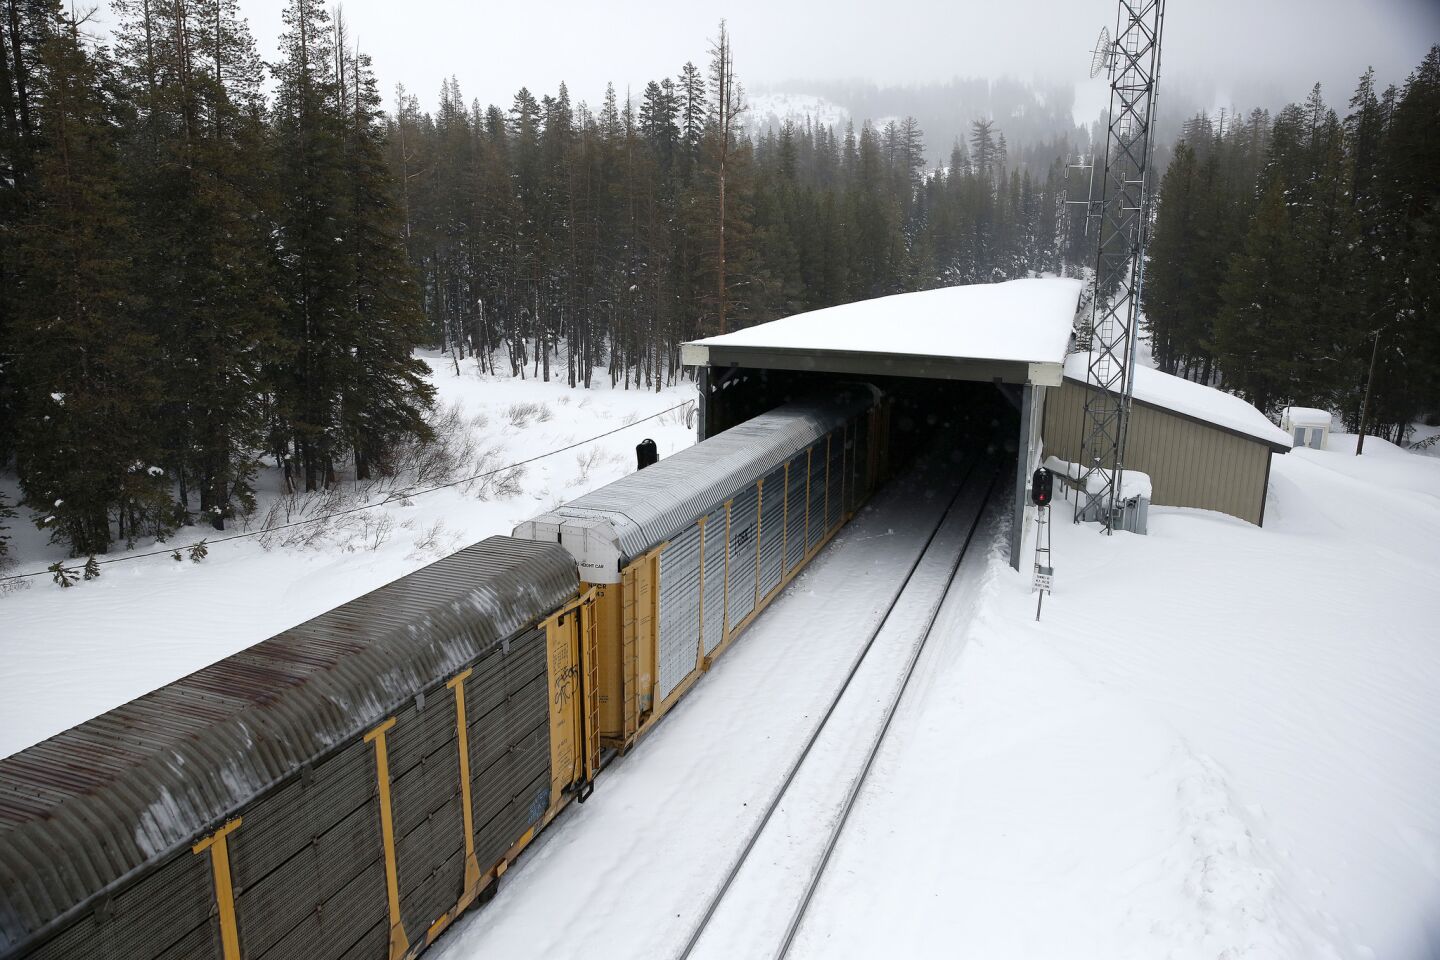 The train passes under an avalanche tunnel near the Sugar Bowl Ski Resort, in Norden, Calif., on Jan. 7, 2017.